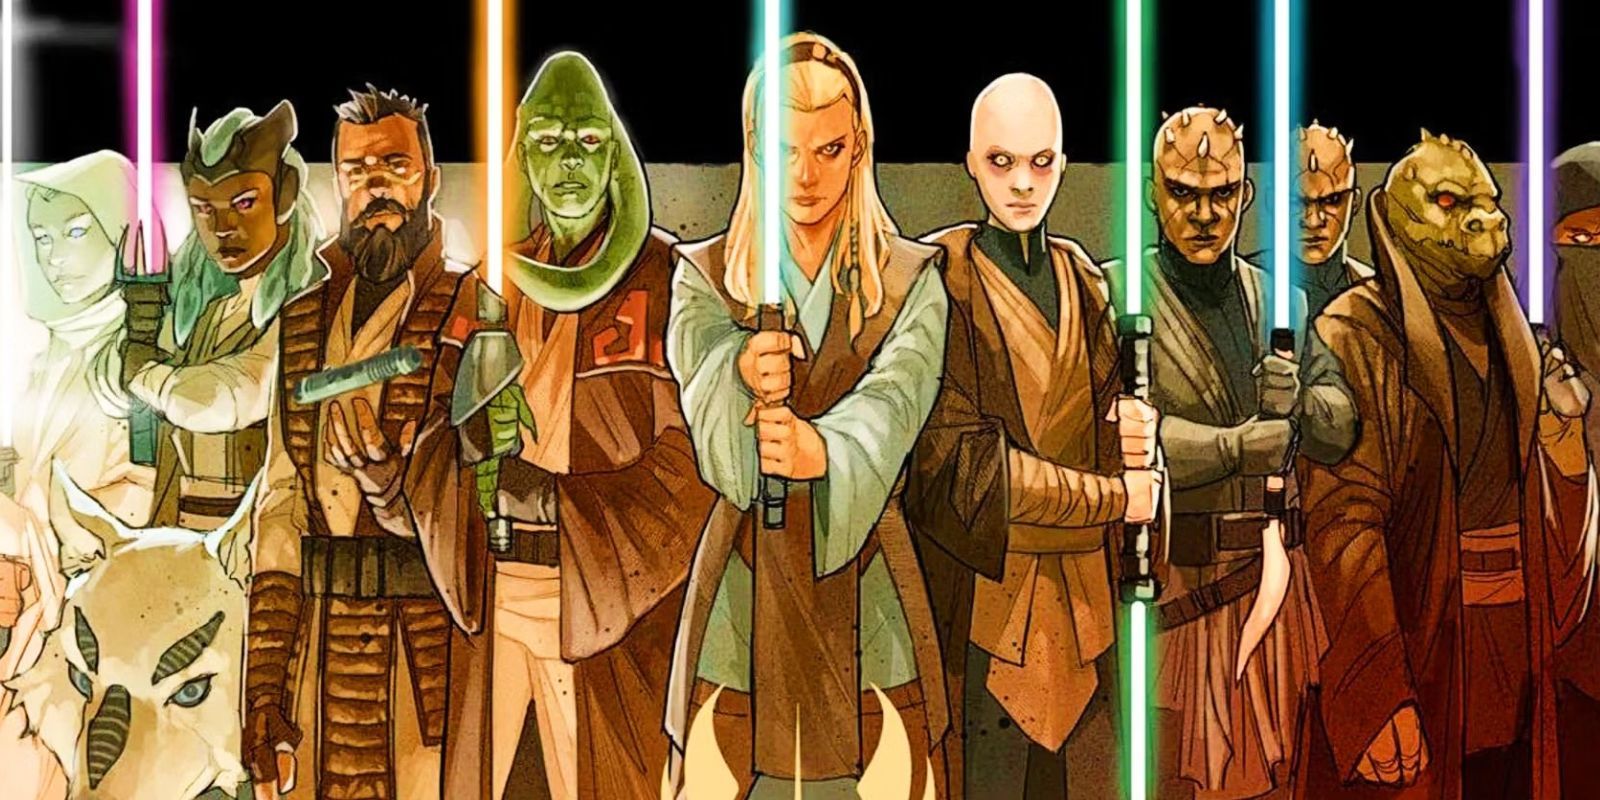 A group of High Republic Jedi with their lightsabers ignited